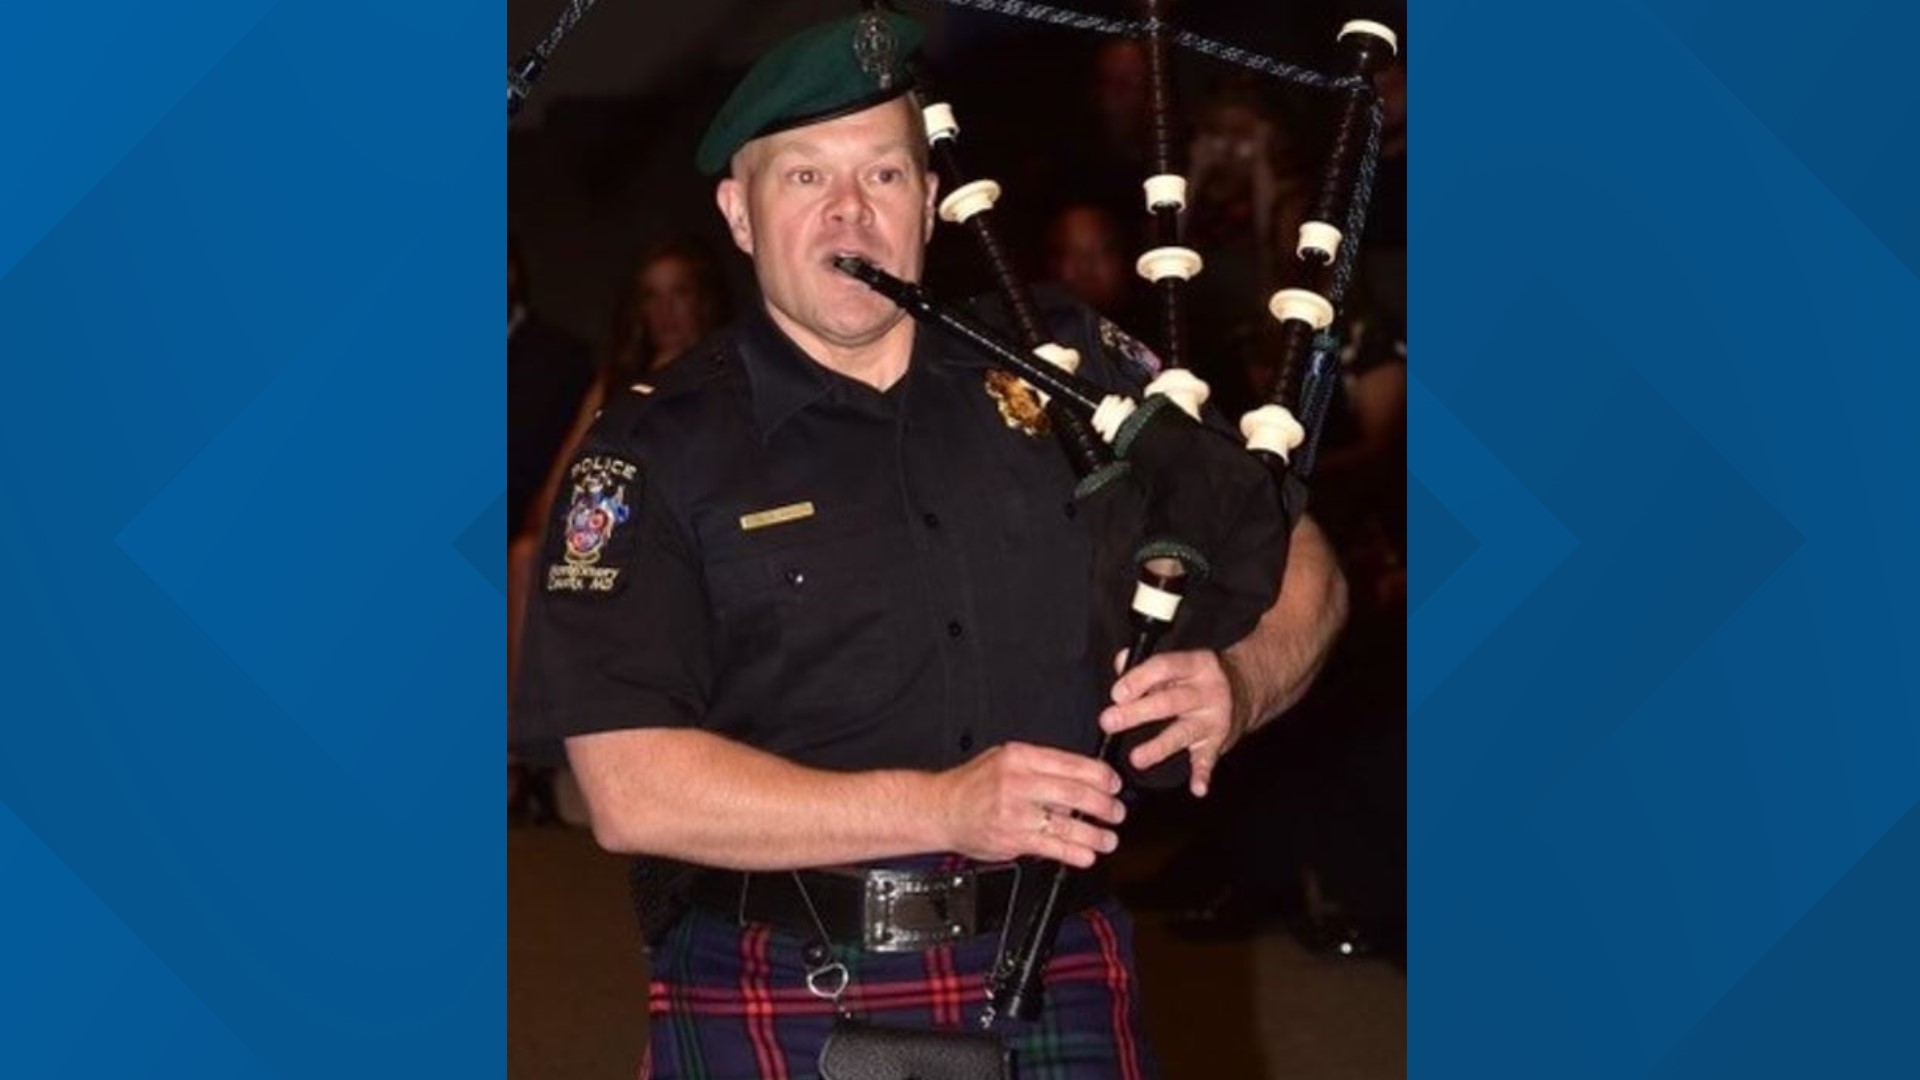 Lieutenant Daniel John Friz has been with the MCPD for more than 18 years, and according to neighbors had three young daughters.